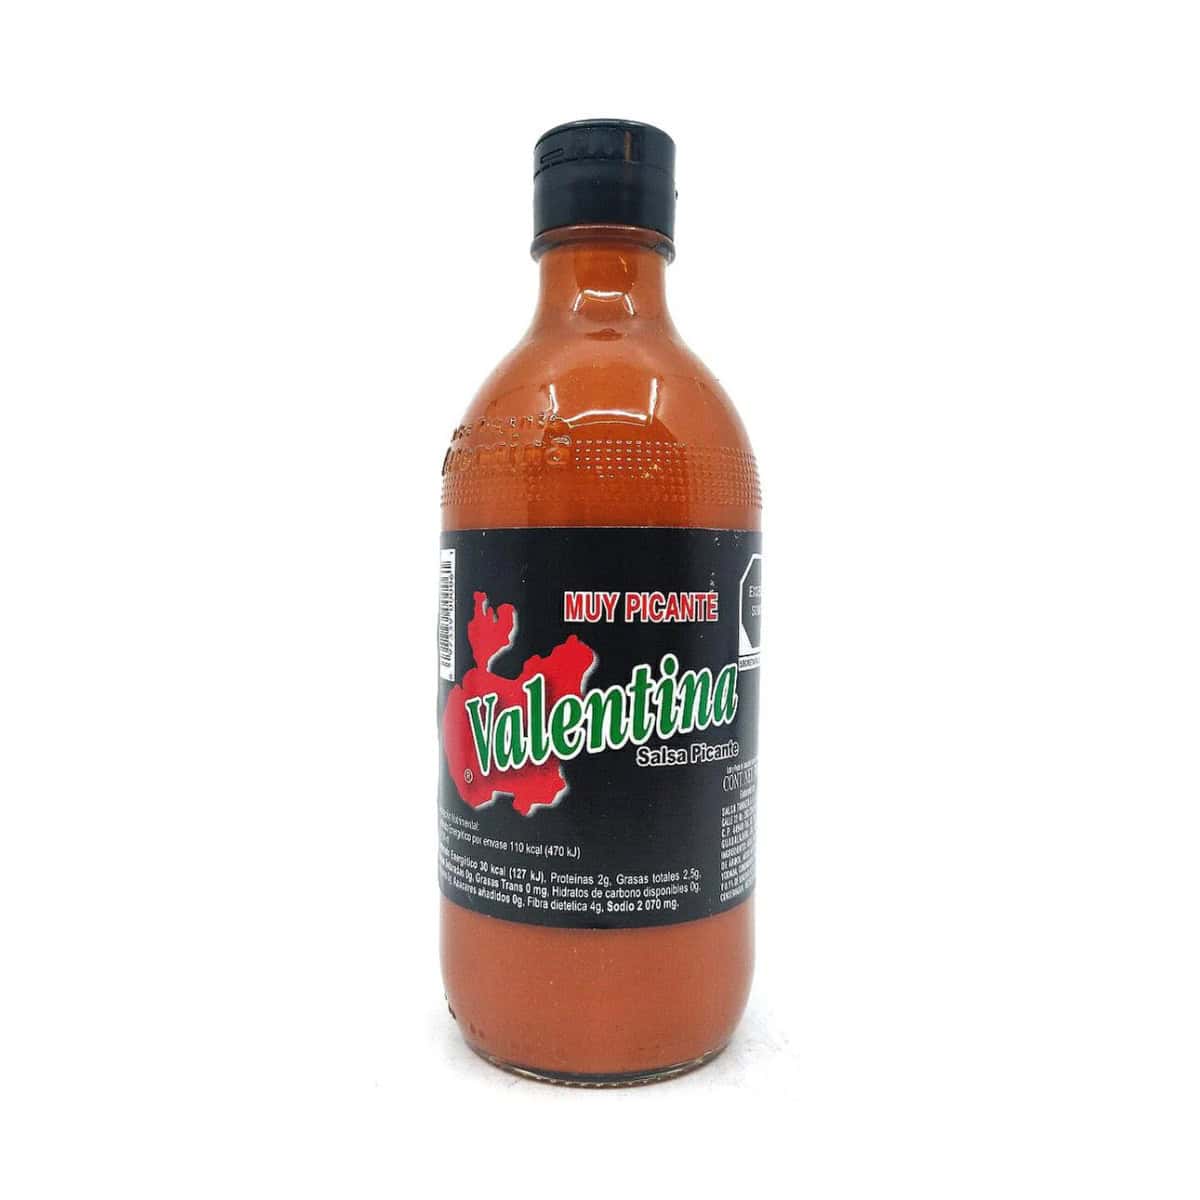 Buy Valentina Salsa Picante (Muy Picante) Mexican Extra Hot Sauce - 370 ml